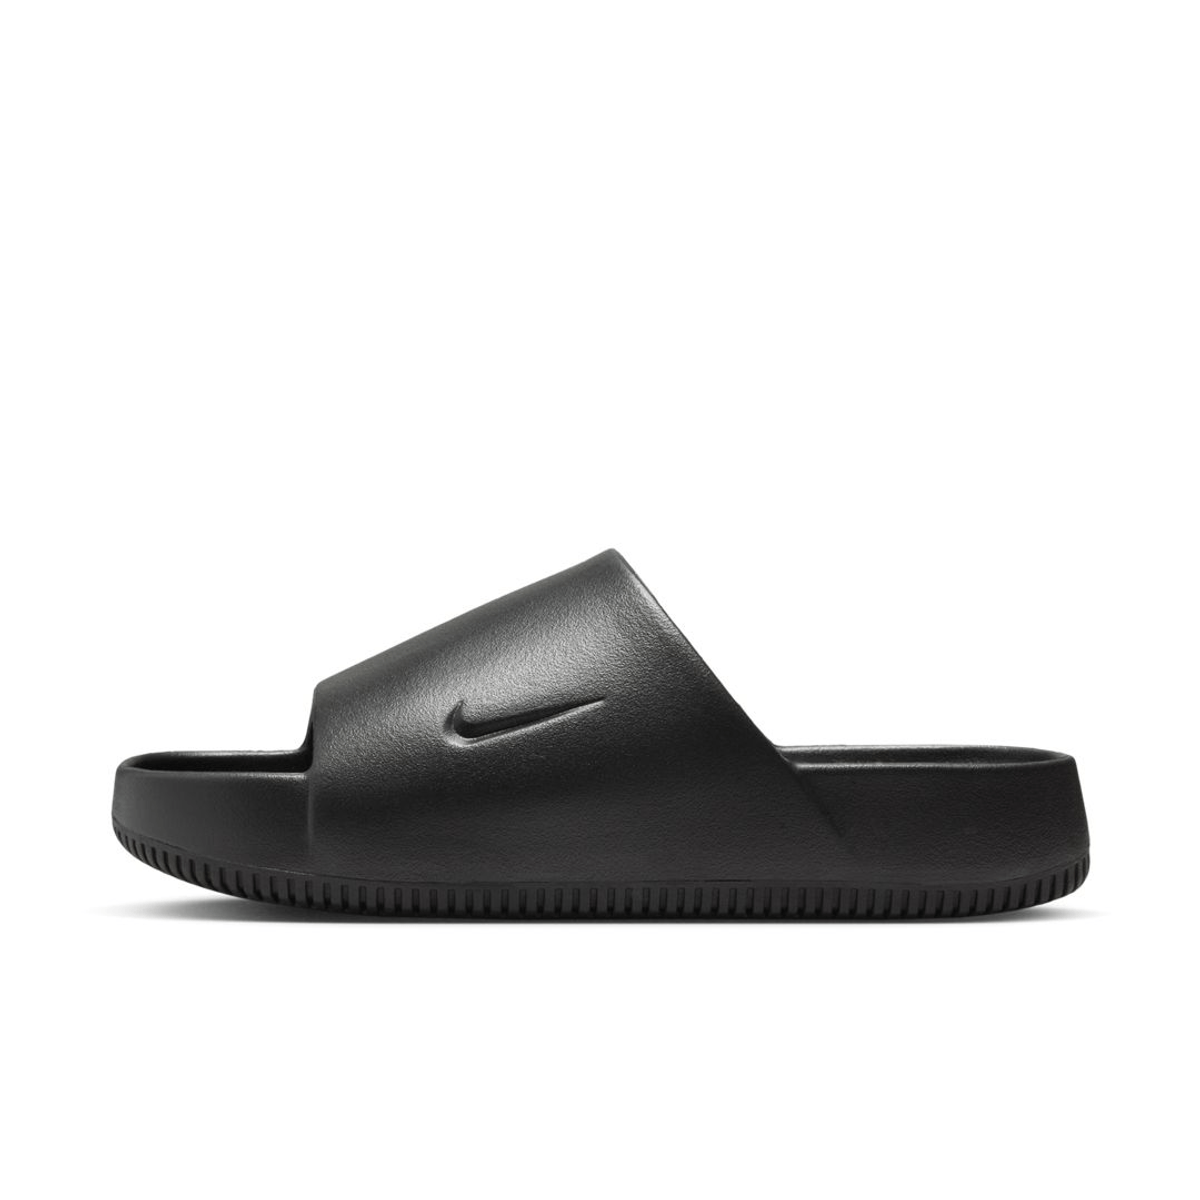 An Honest Review Of The Nike Calm Slide